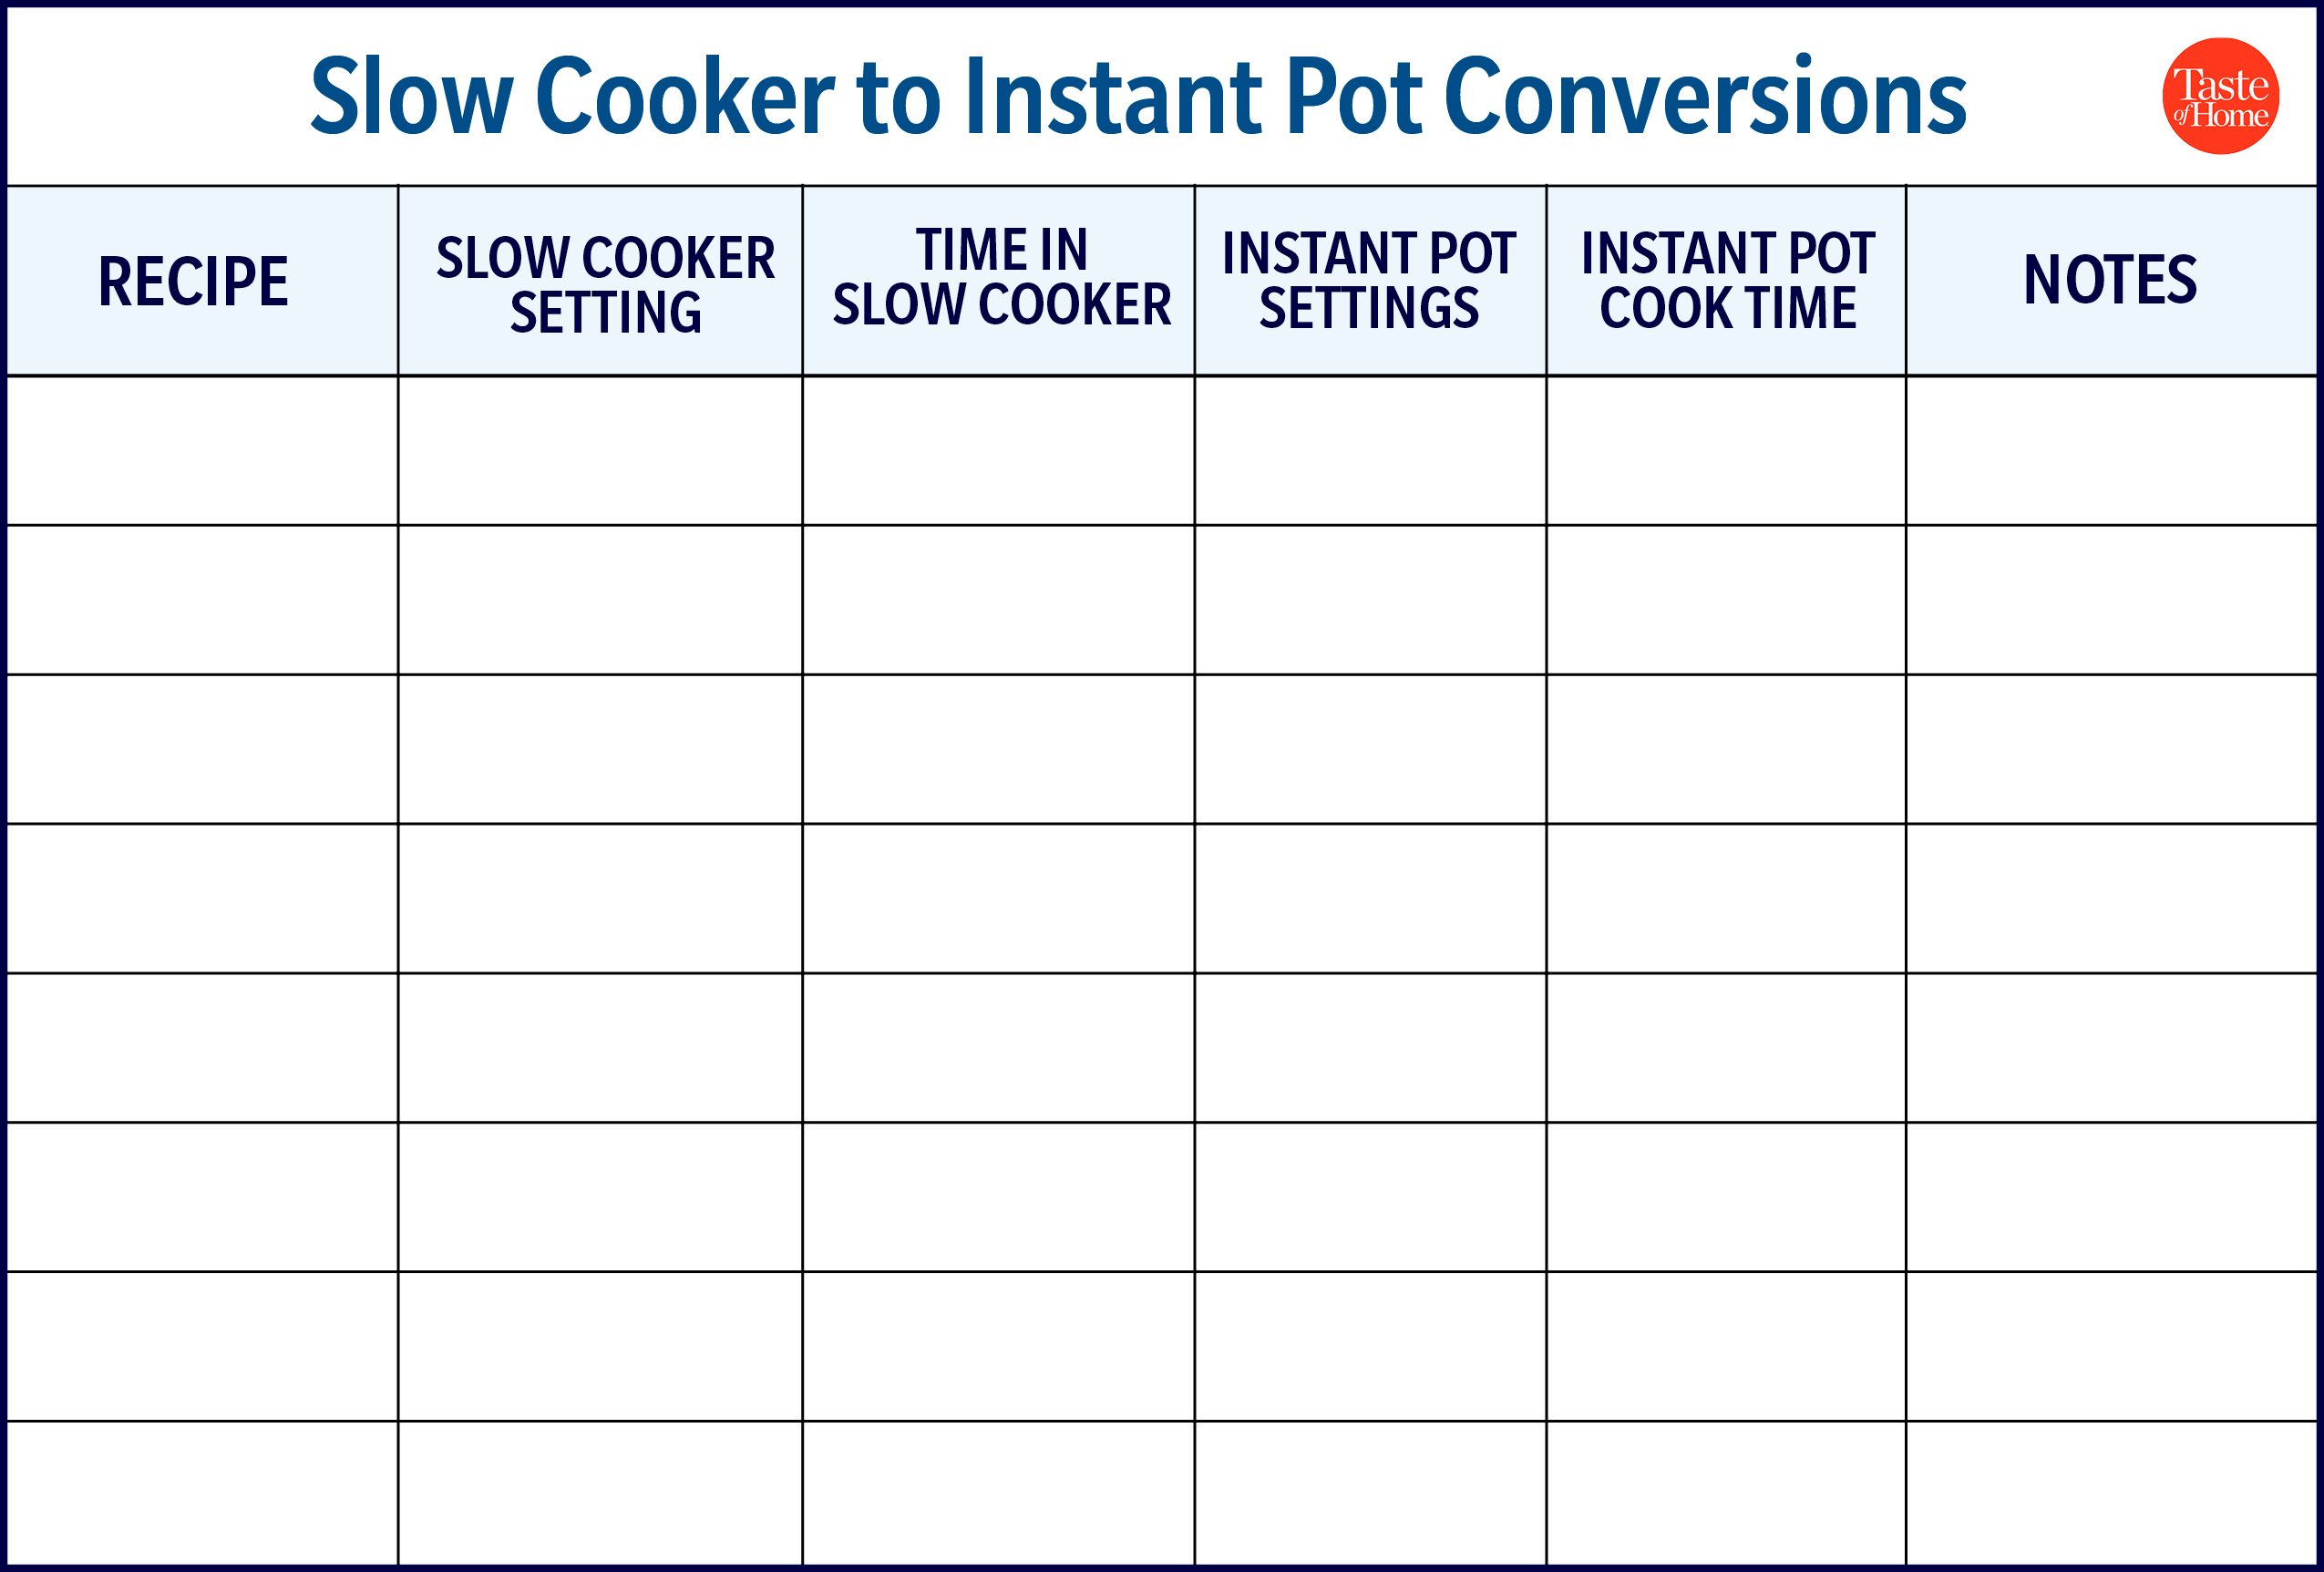 https://www.tasteofhome.com/wp-content/uploads/2018/02/How-to-Make-Seamless-Slow-Cooker-to-Instant-Pot-Conversions.jpg?fit=680%2C460